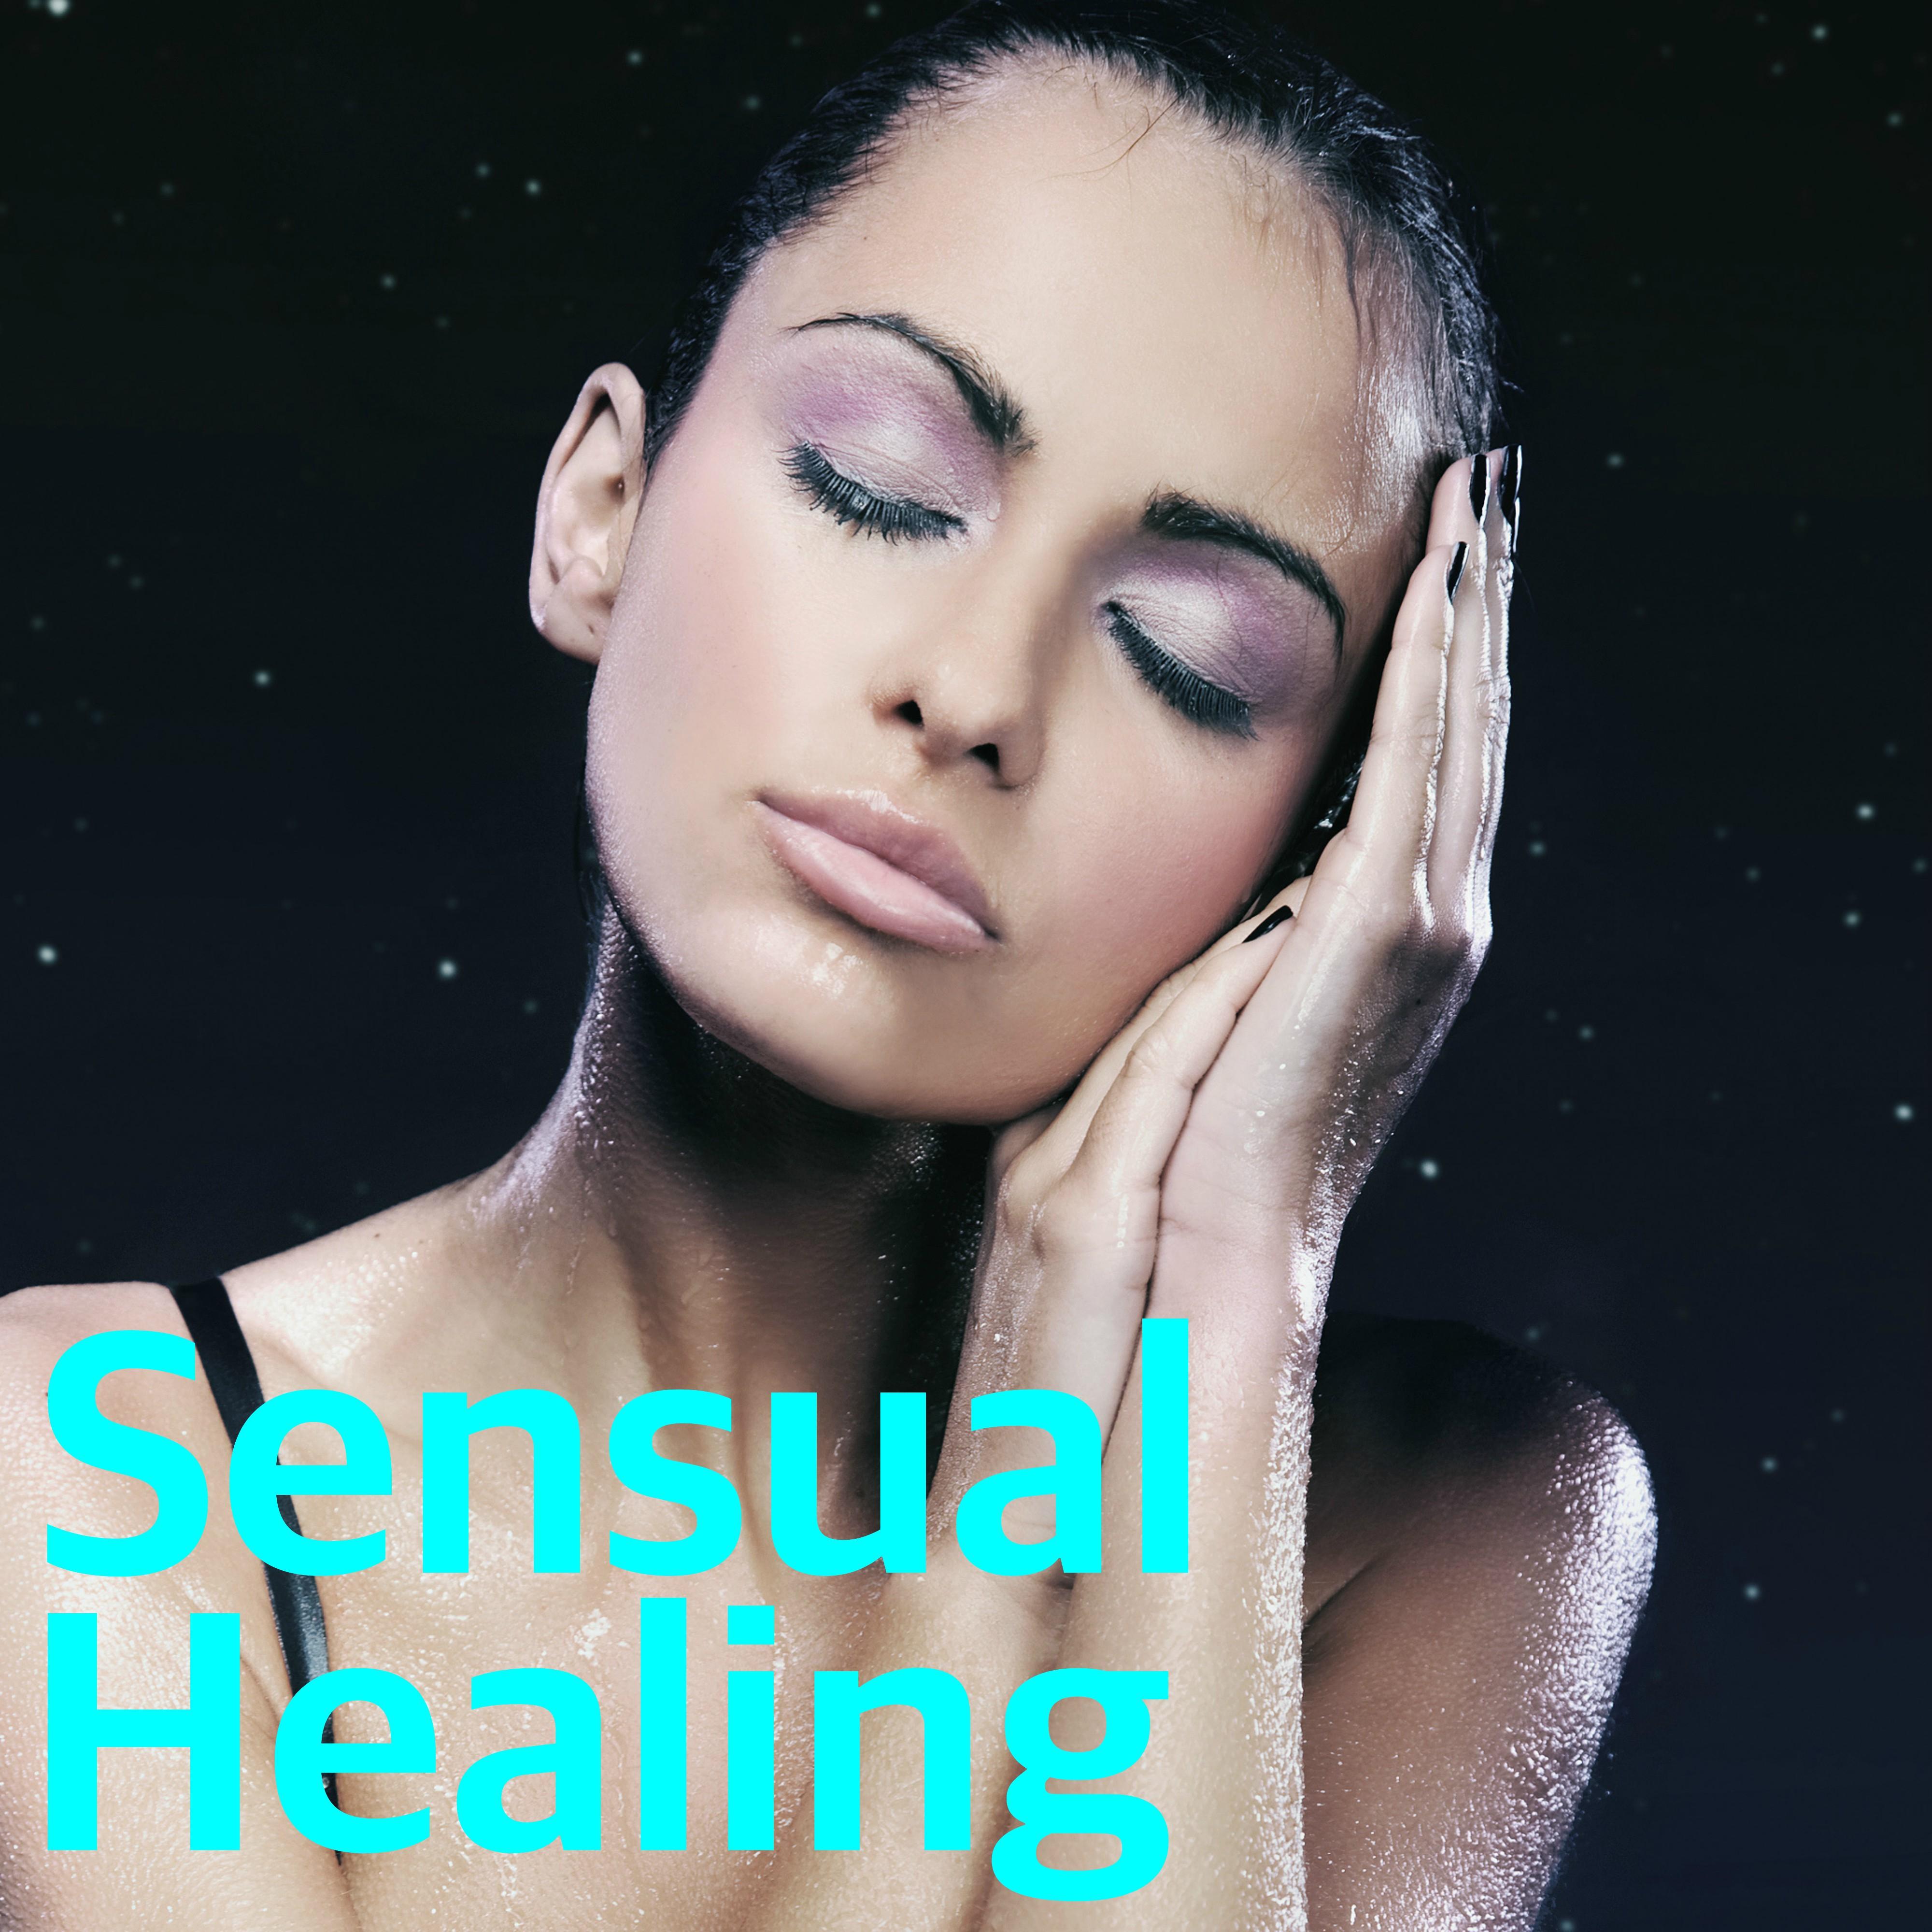 Sensual Healing - Sexual Background for Erotic Sex, Erotic Music for Stimulant Massage